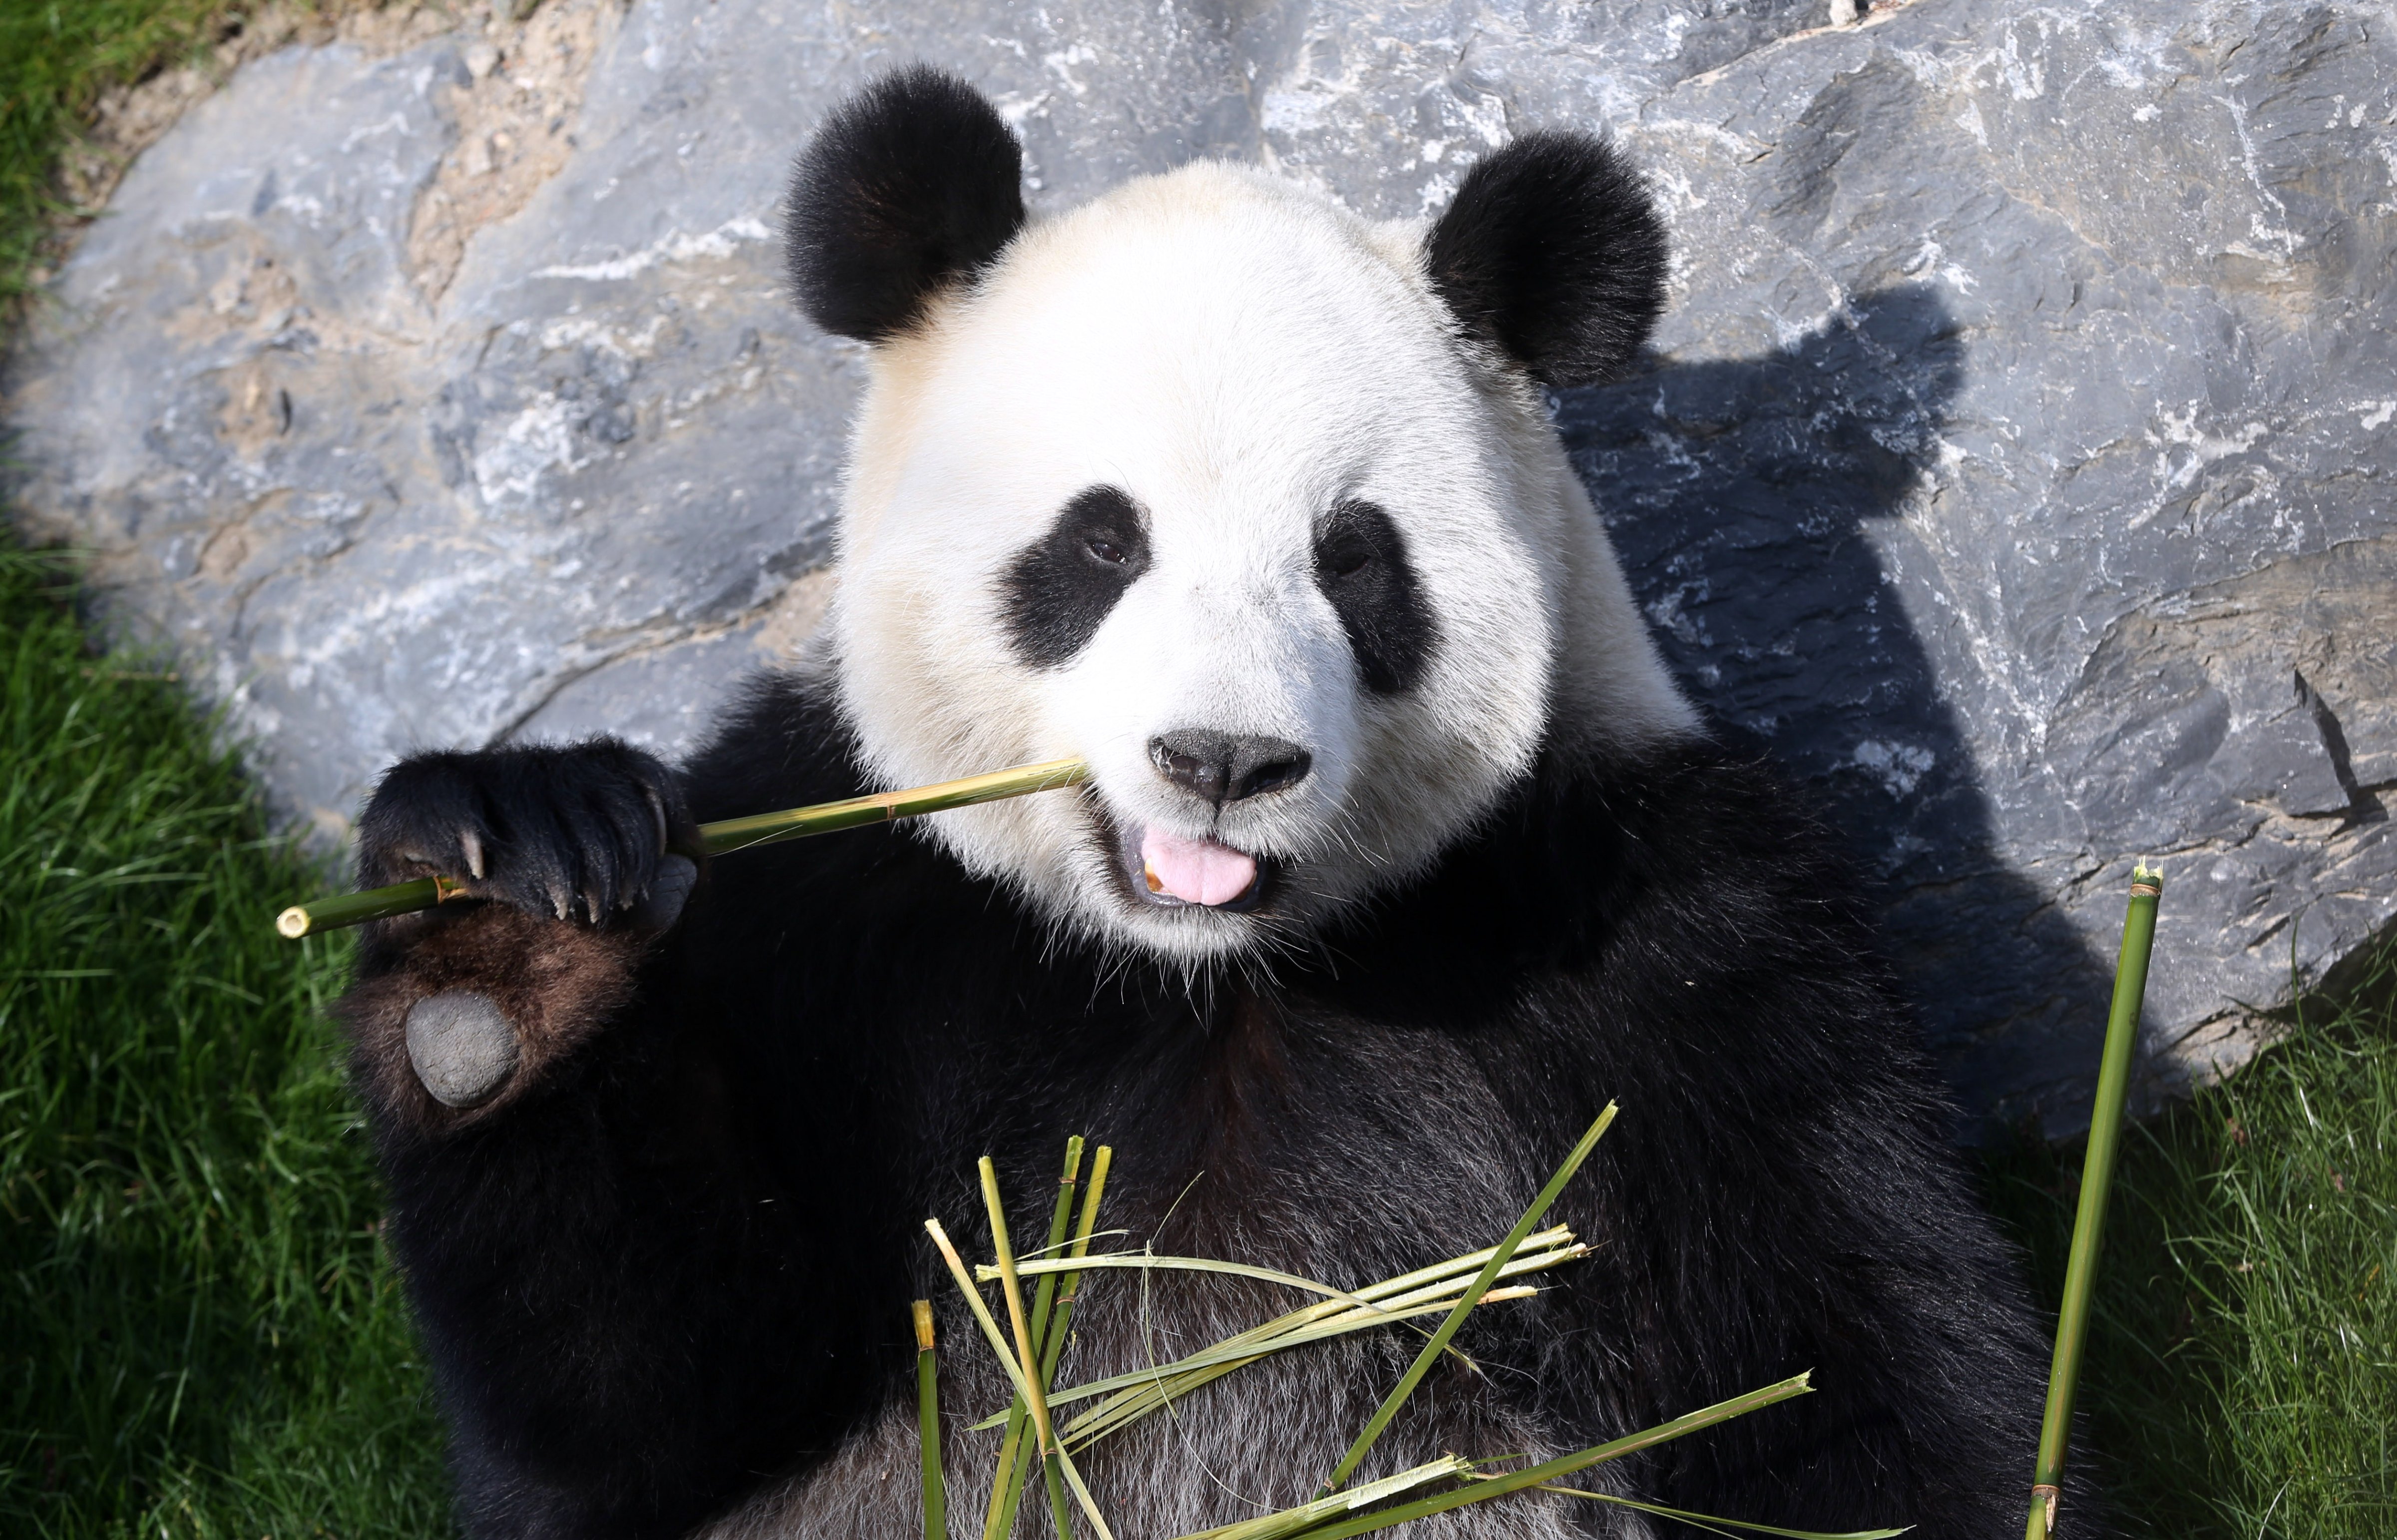 A photo taken on April 1, 2014 shows the giant panda Hao Hao eating bamboo at Pairi Daiza animal park in Brugelette, Belgium. (Virginie Lefour—AFP/Getty Images)